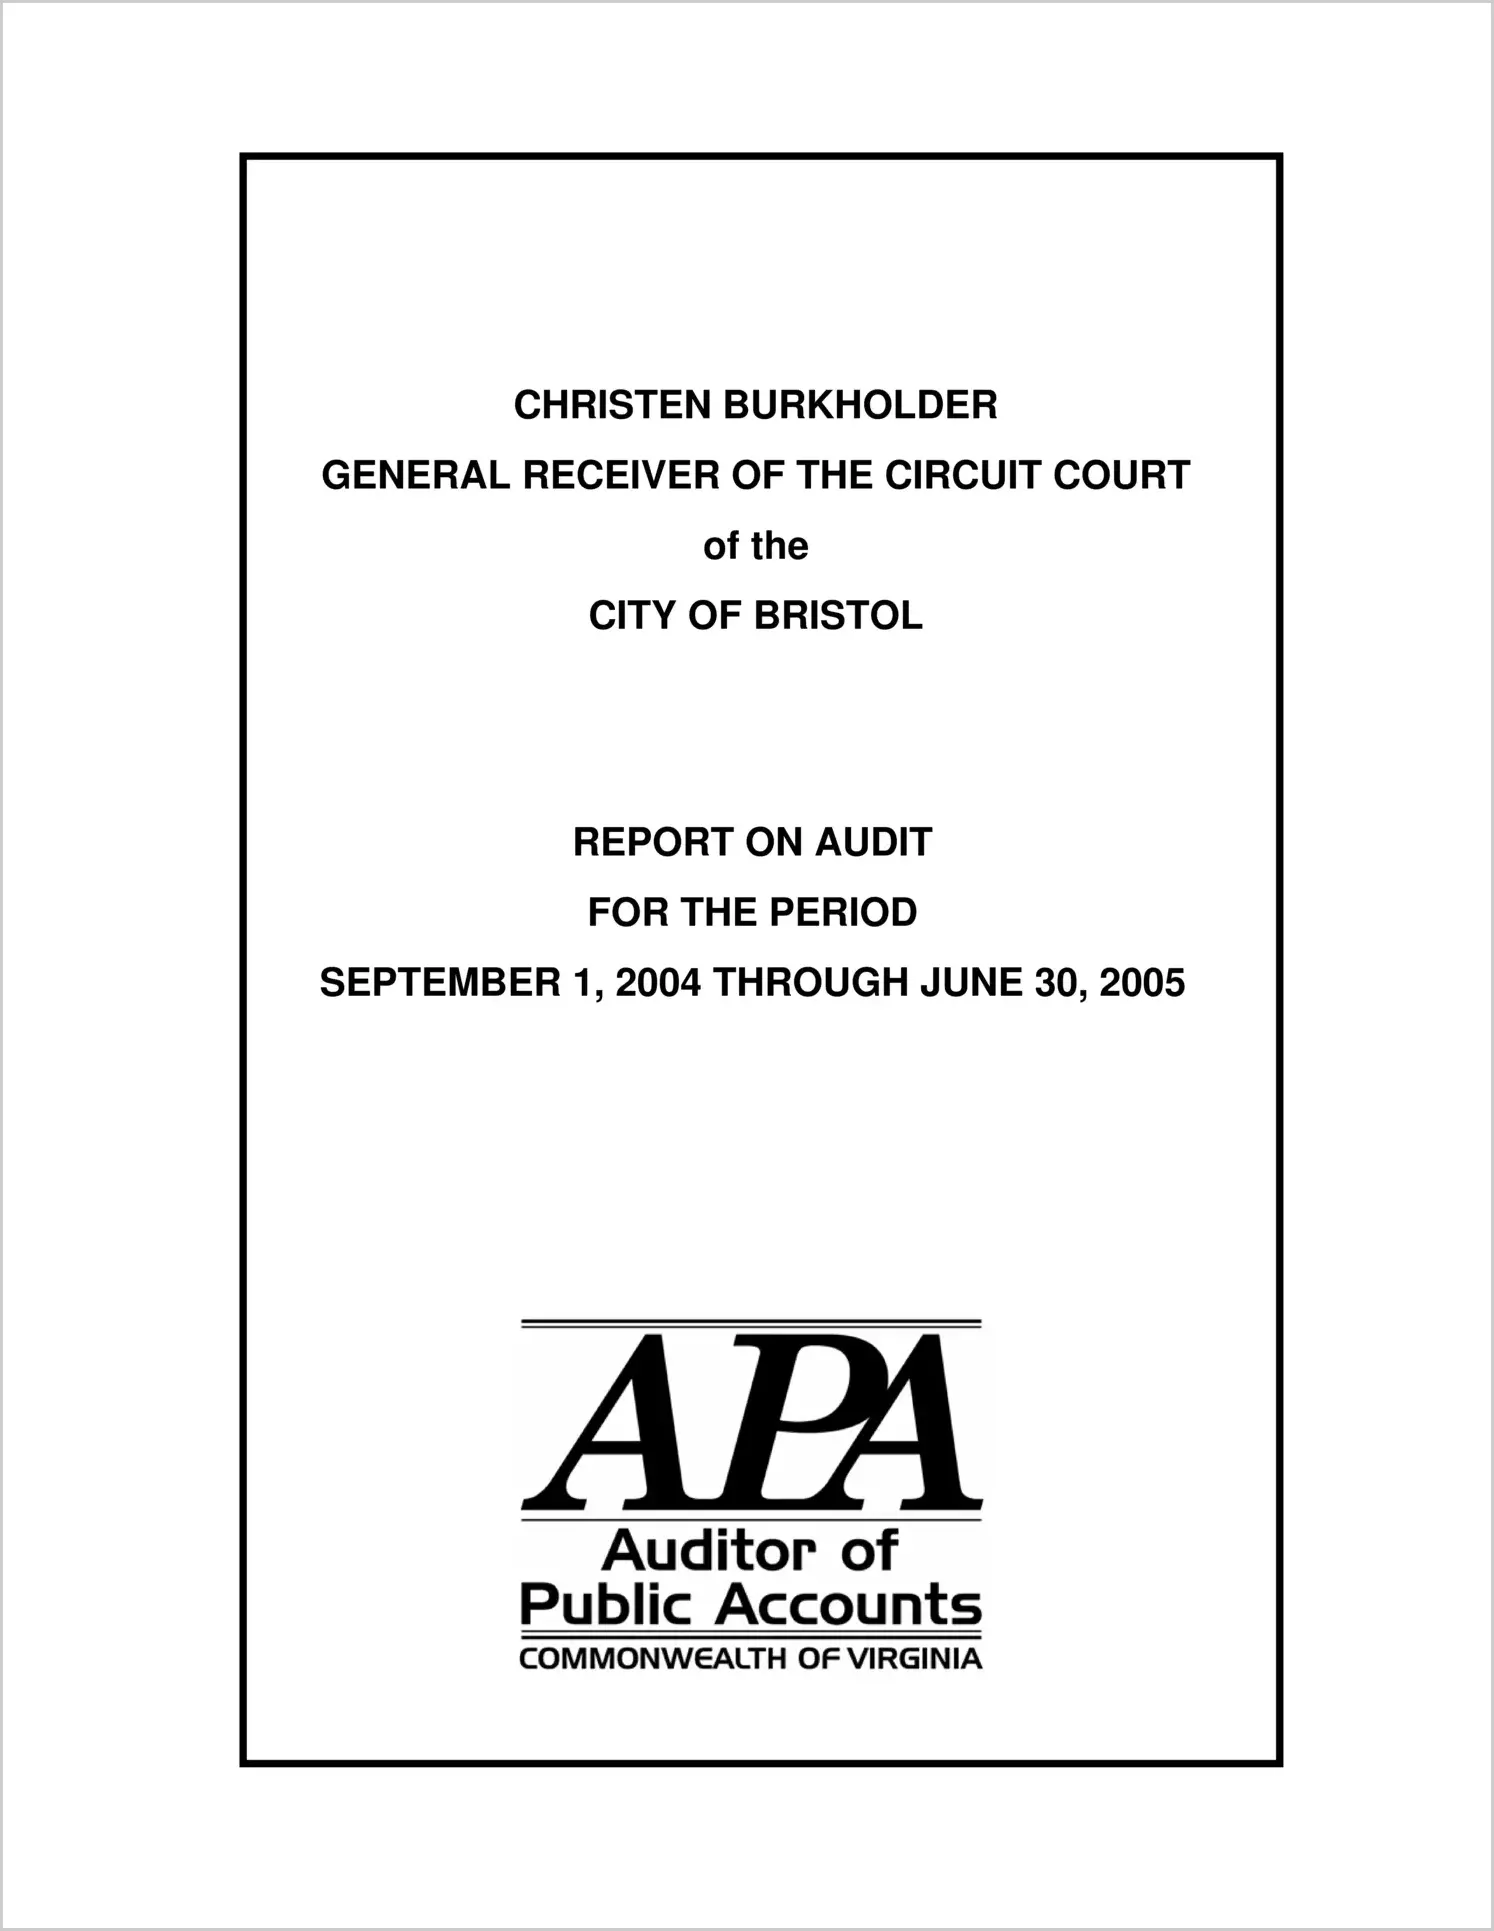 General Receiver of the Circuit Court of the County of Bristol for the period September 1, 2004 through June 30, 2005